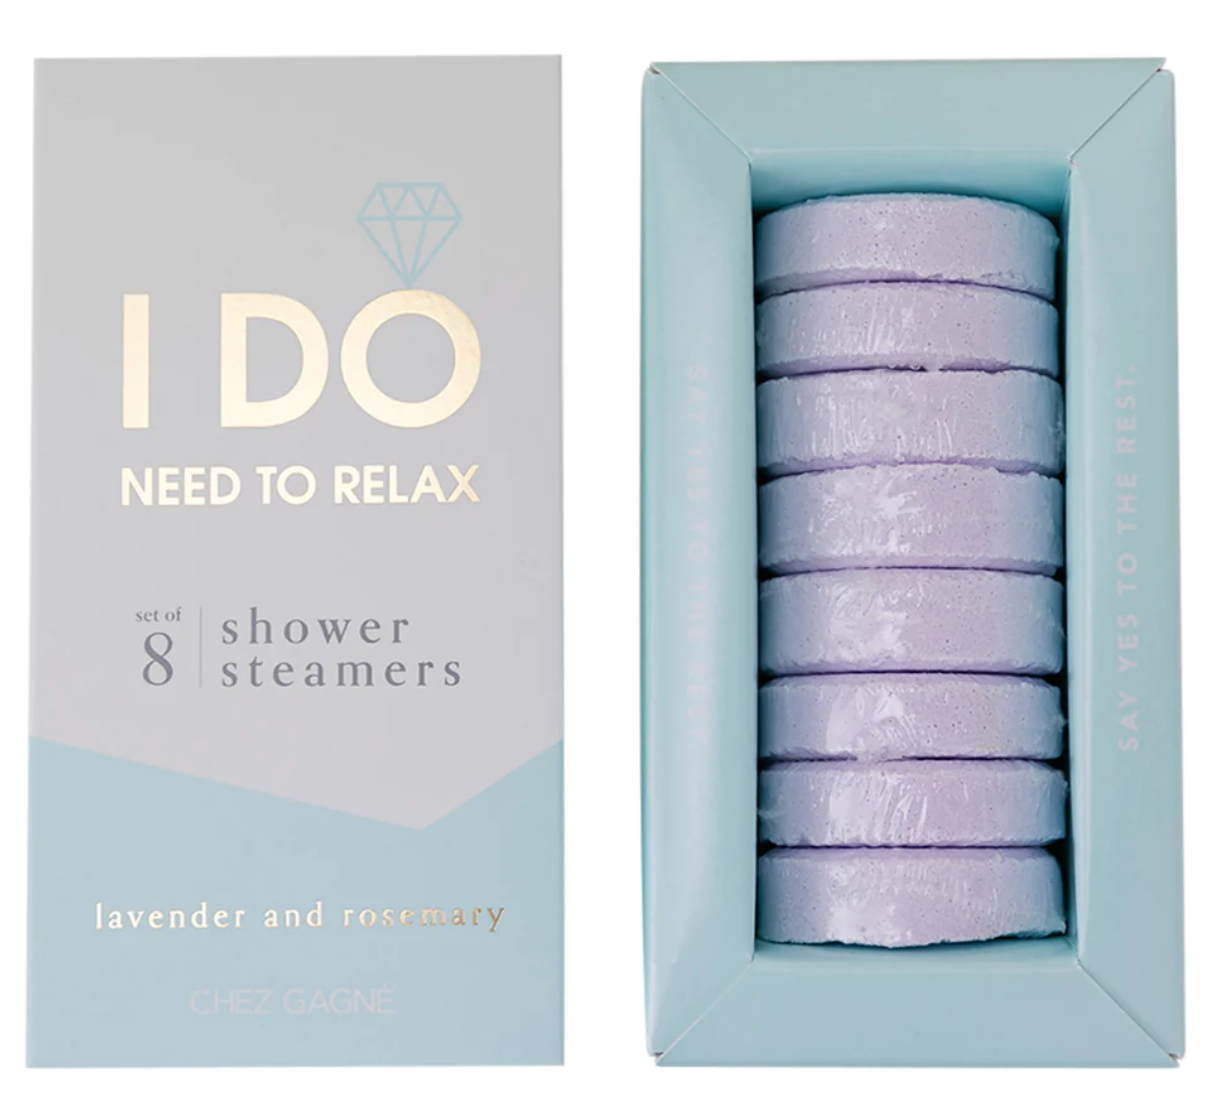 I Do Need To Relax Shower Steamers - Lavender and Rosemary